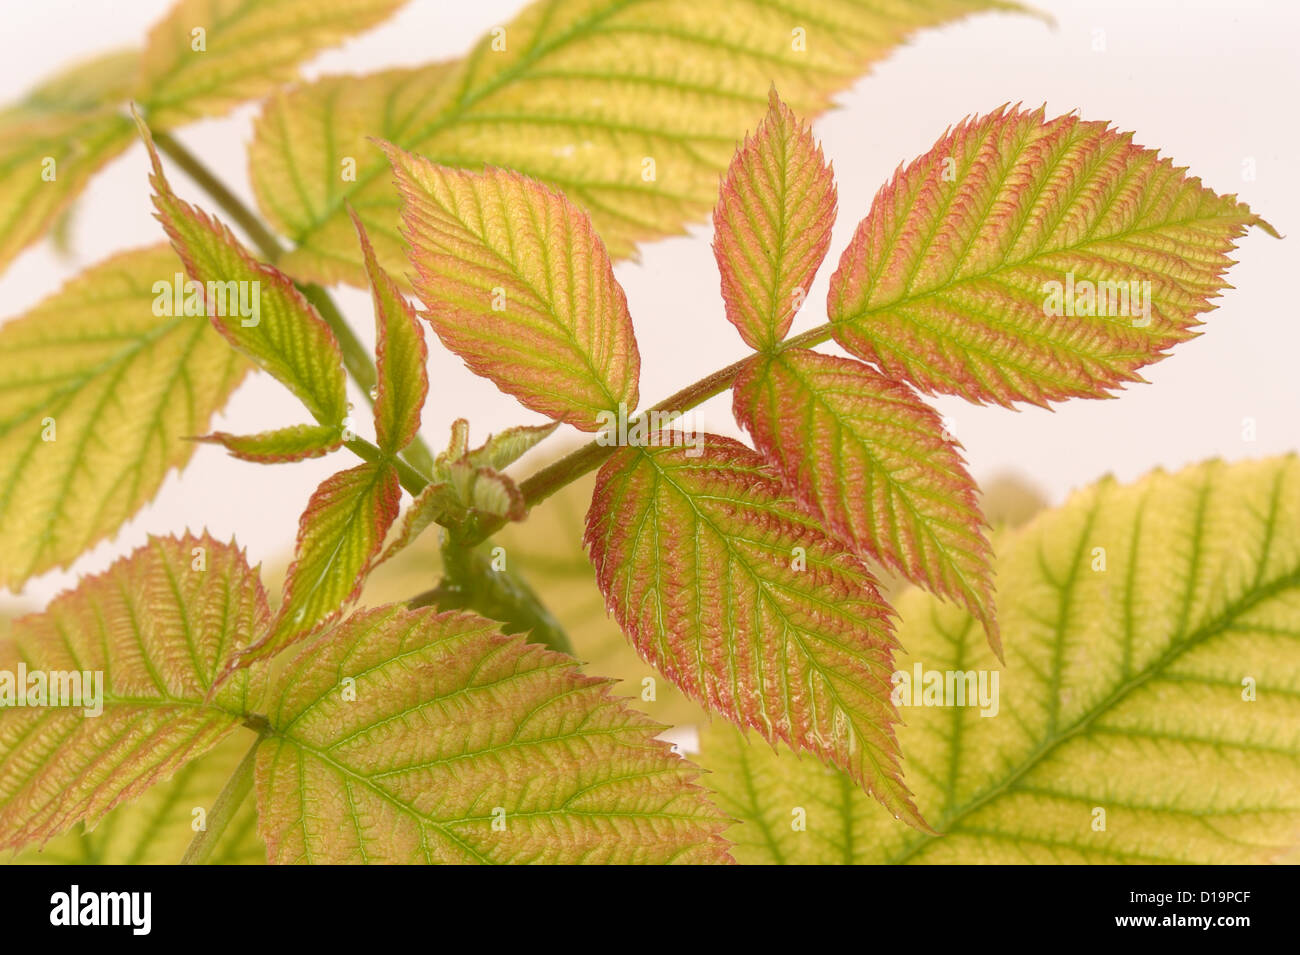 Residual damage to young raspberry foliage caused by glyphosate contamination Stock Photo